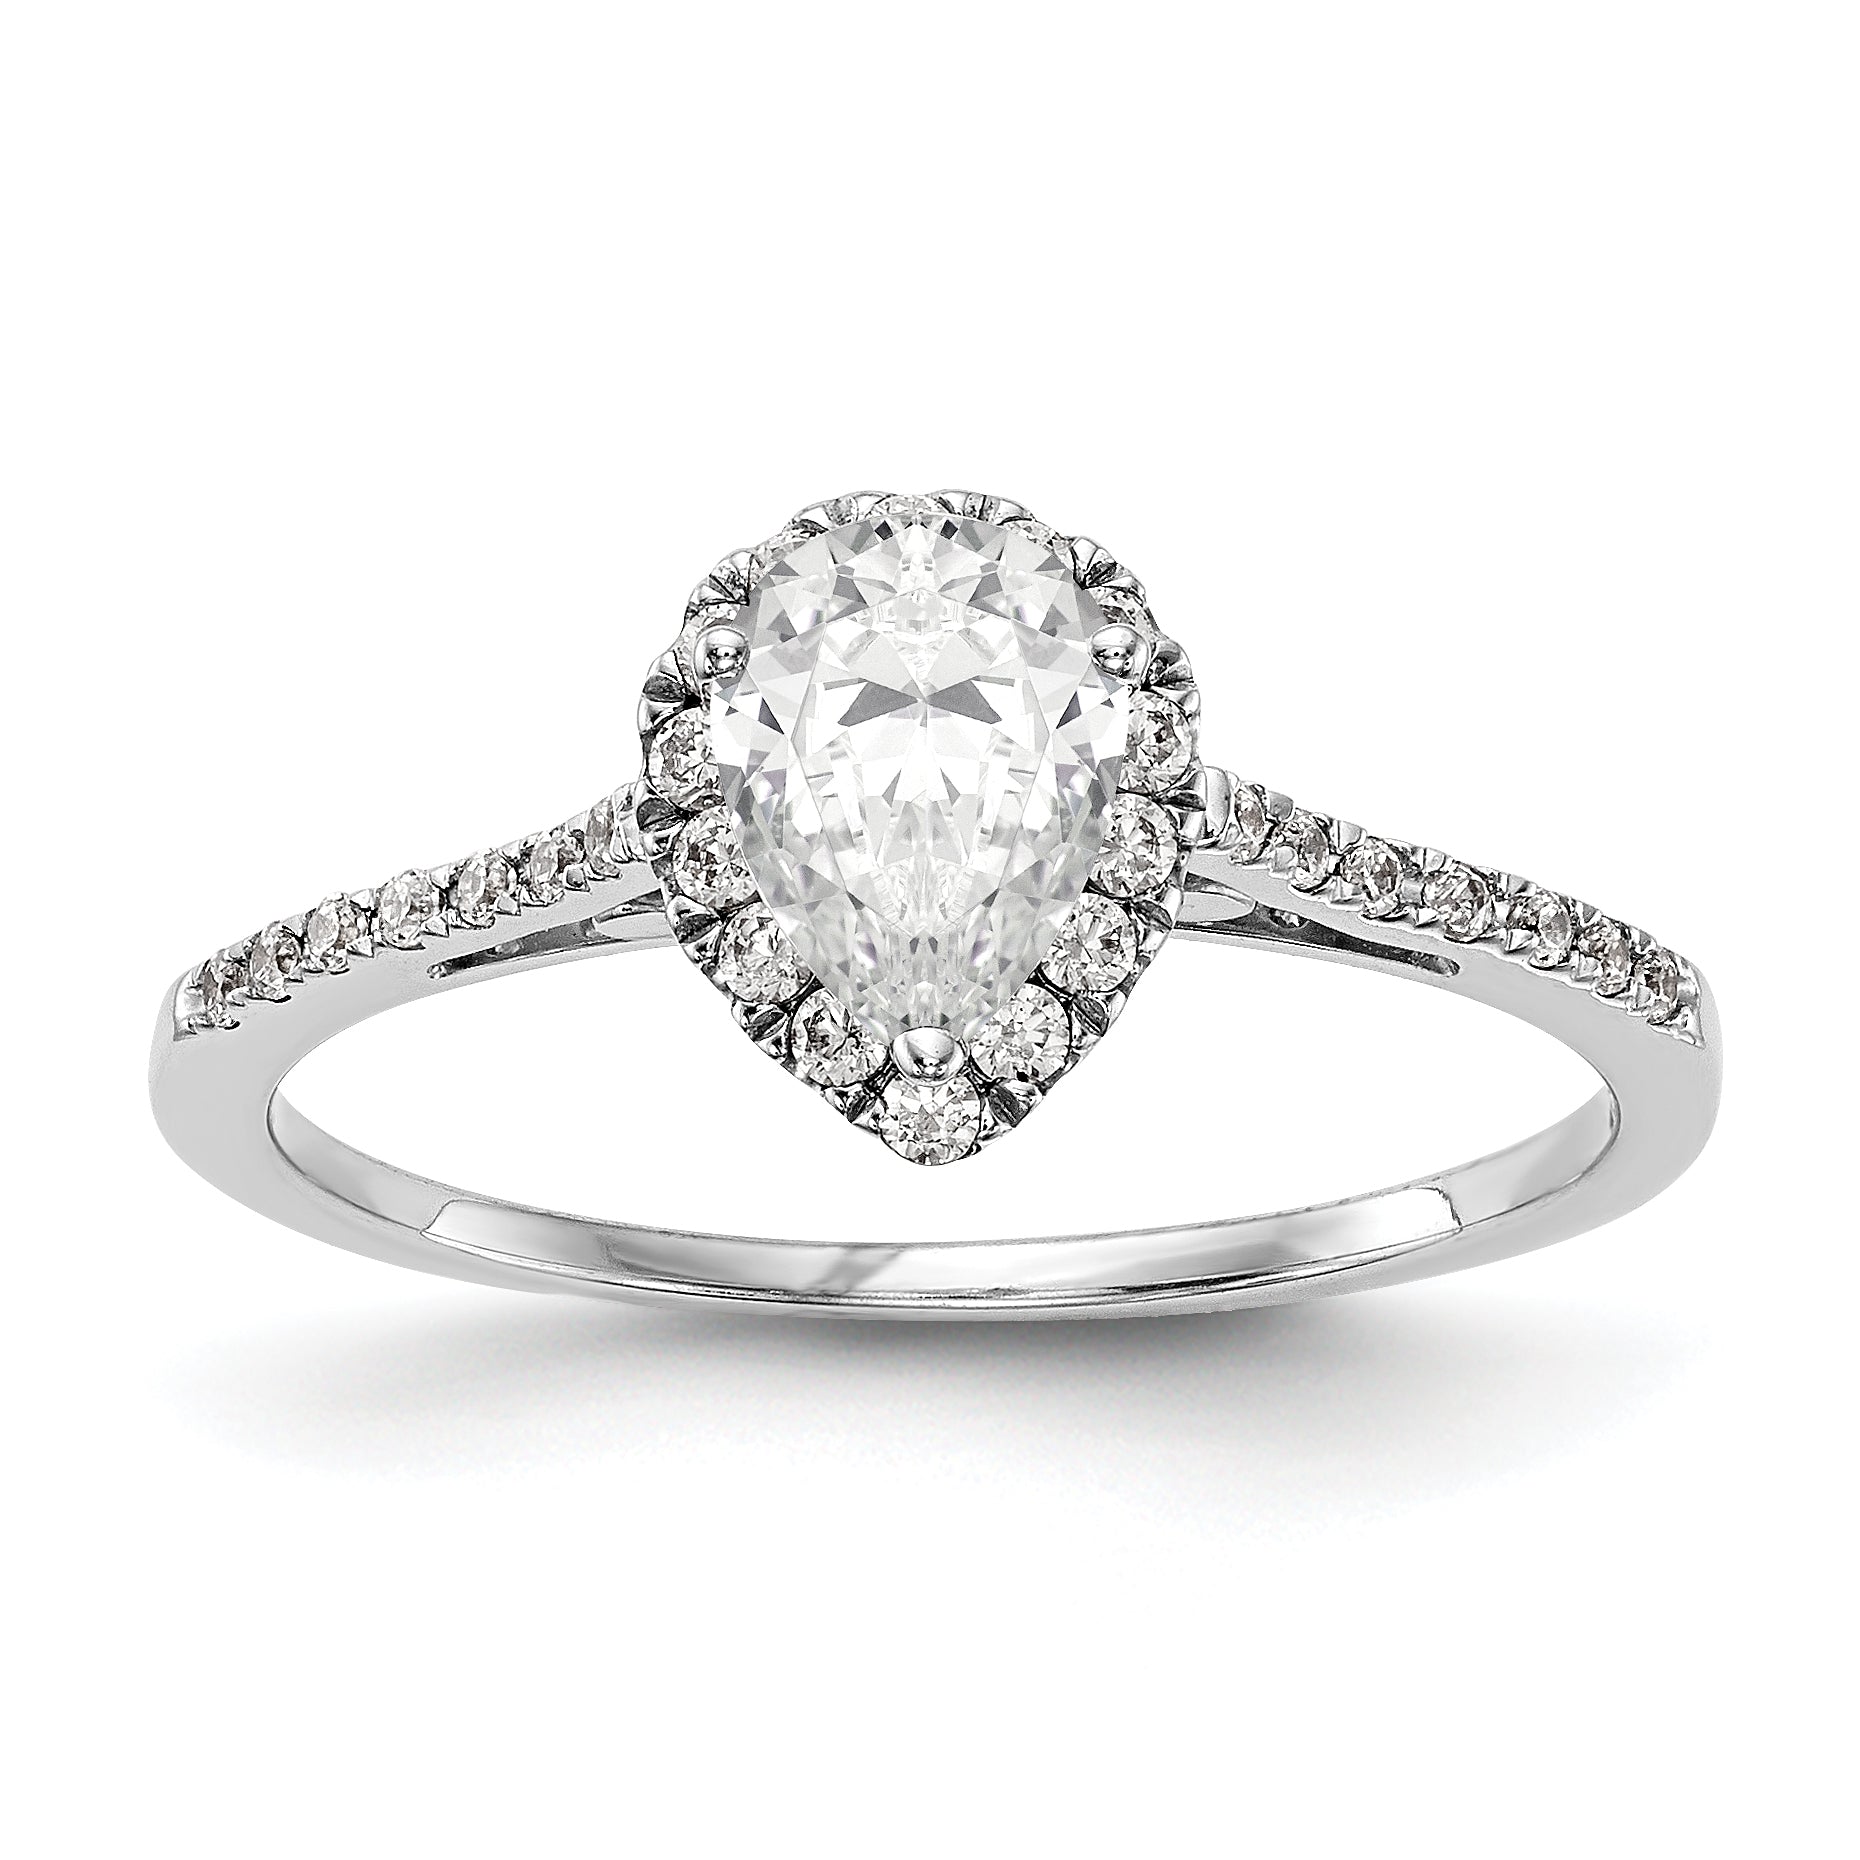 Image of ID 1 1/3 Ct Natural Pear Shape Diamond Semi-mount Engagement Ring in 14K White Gold